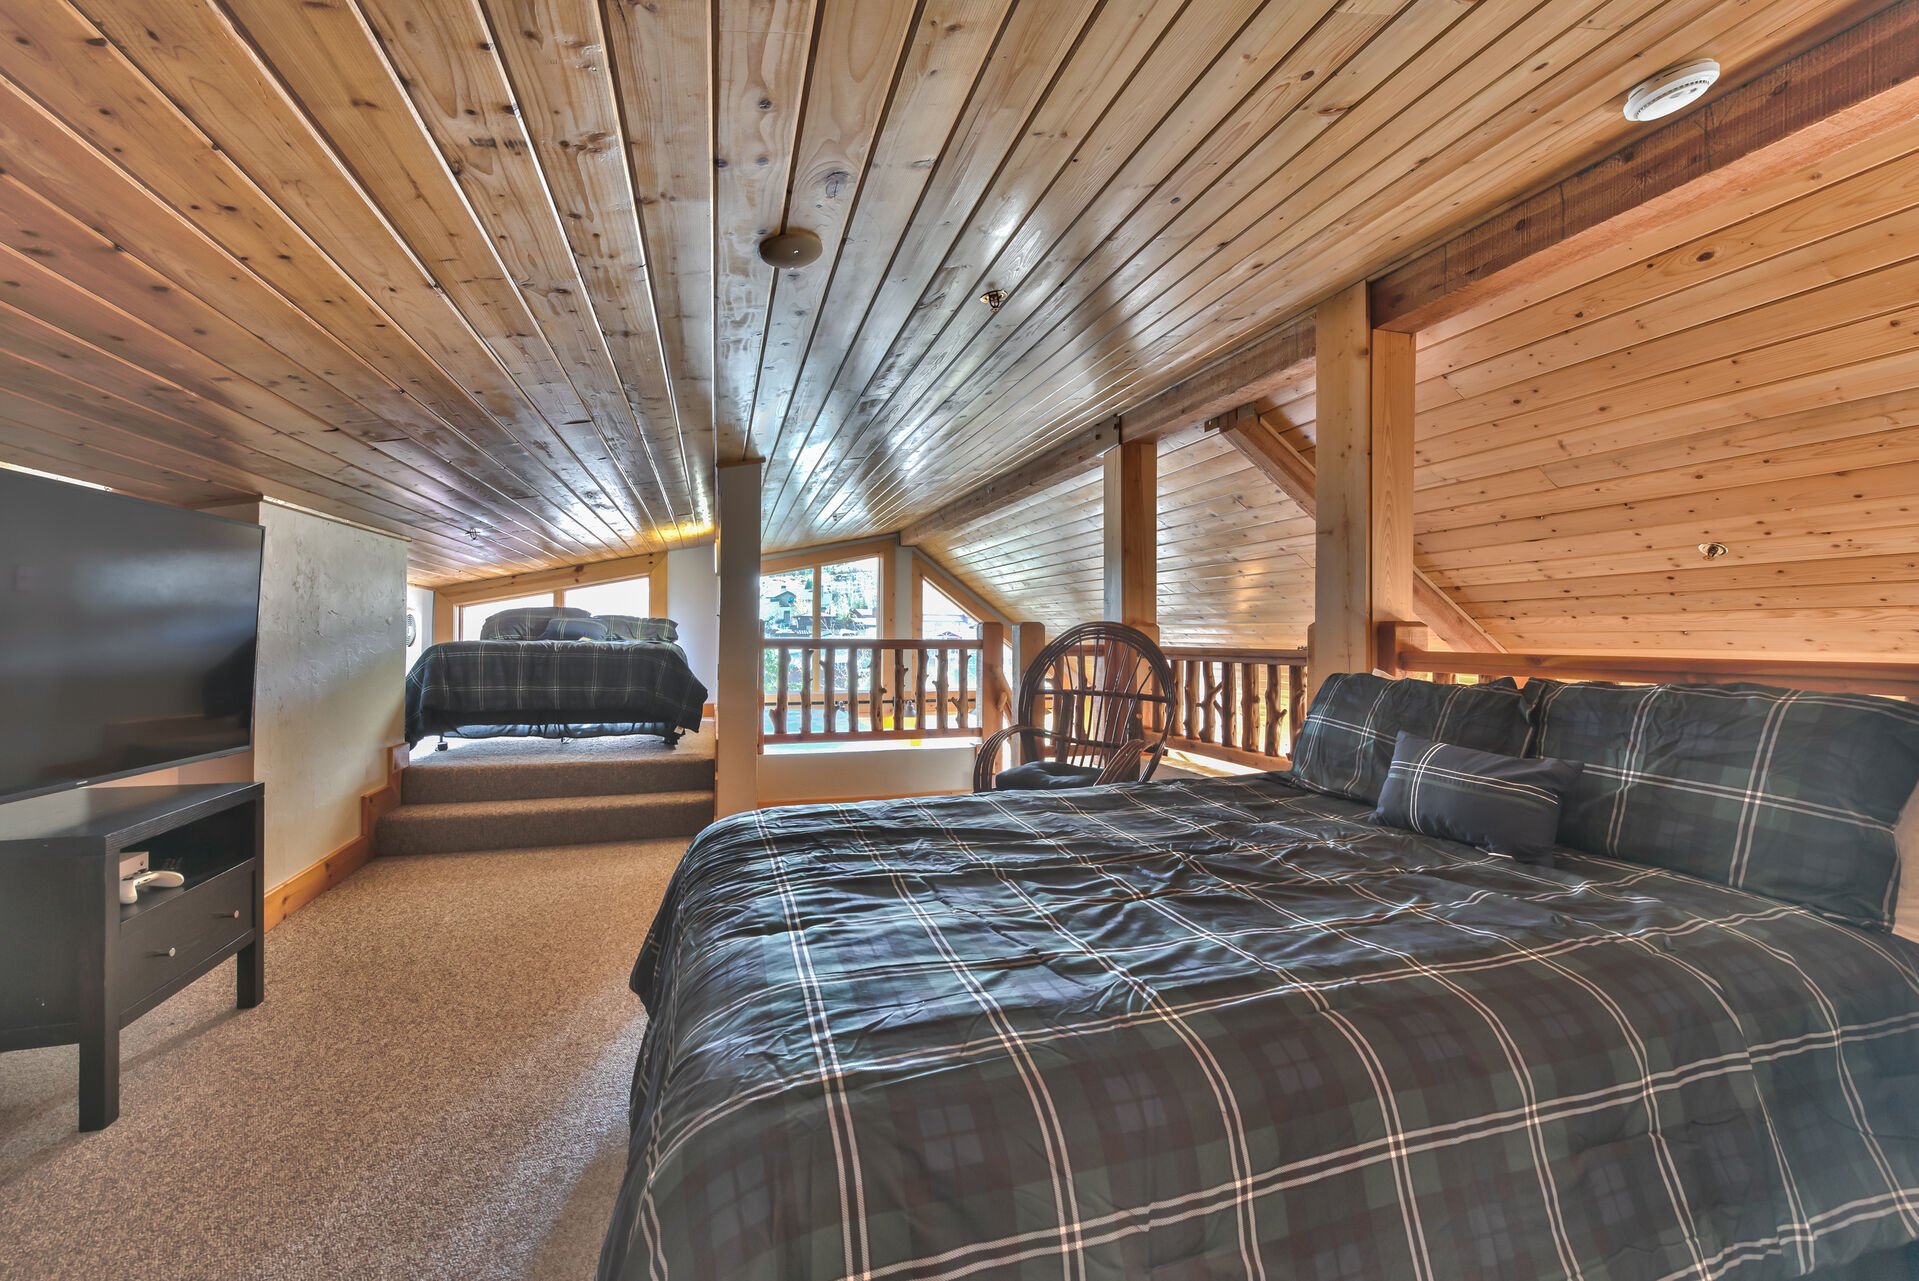 408 B- 2nd Loft Bedroom with Two Queen Beds, Two Twin Beds and a Full-size Bed, a 60